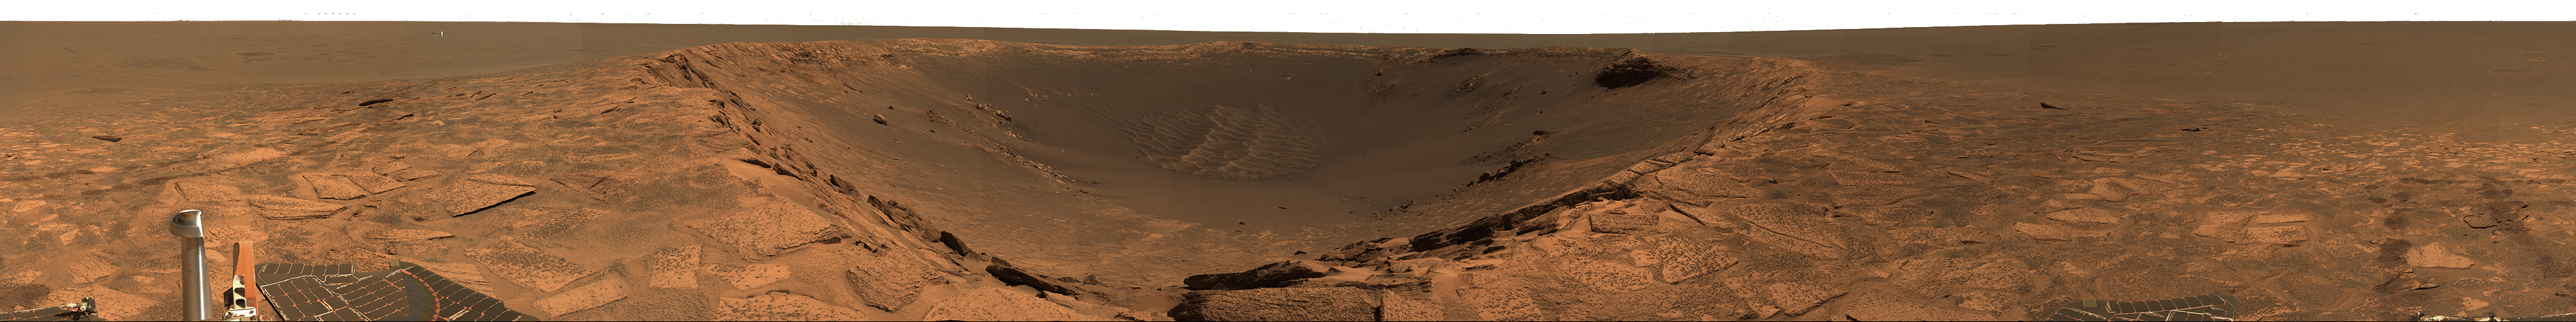 MER Opportunity at Endurance Crater